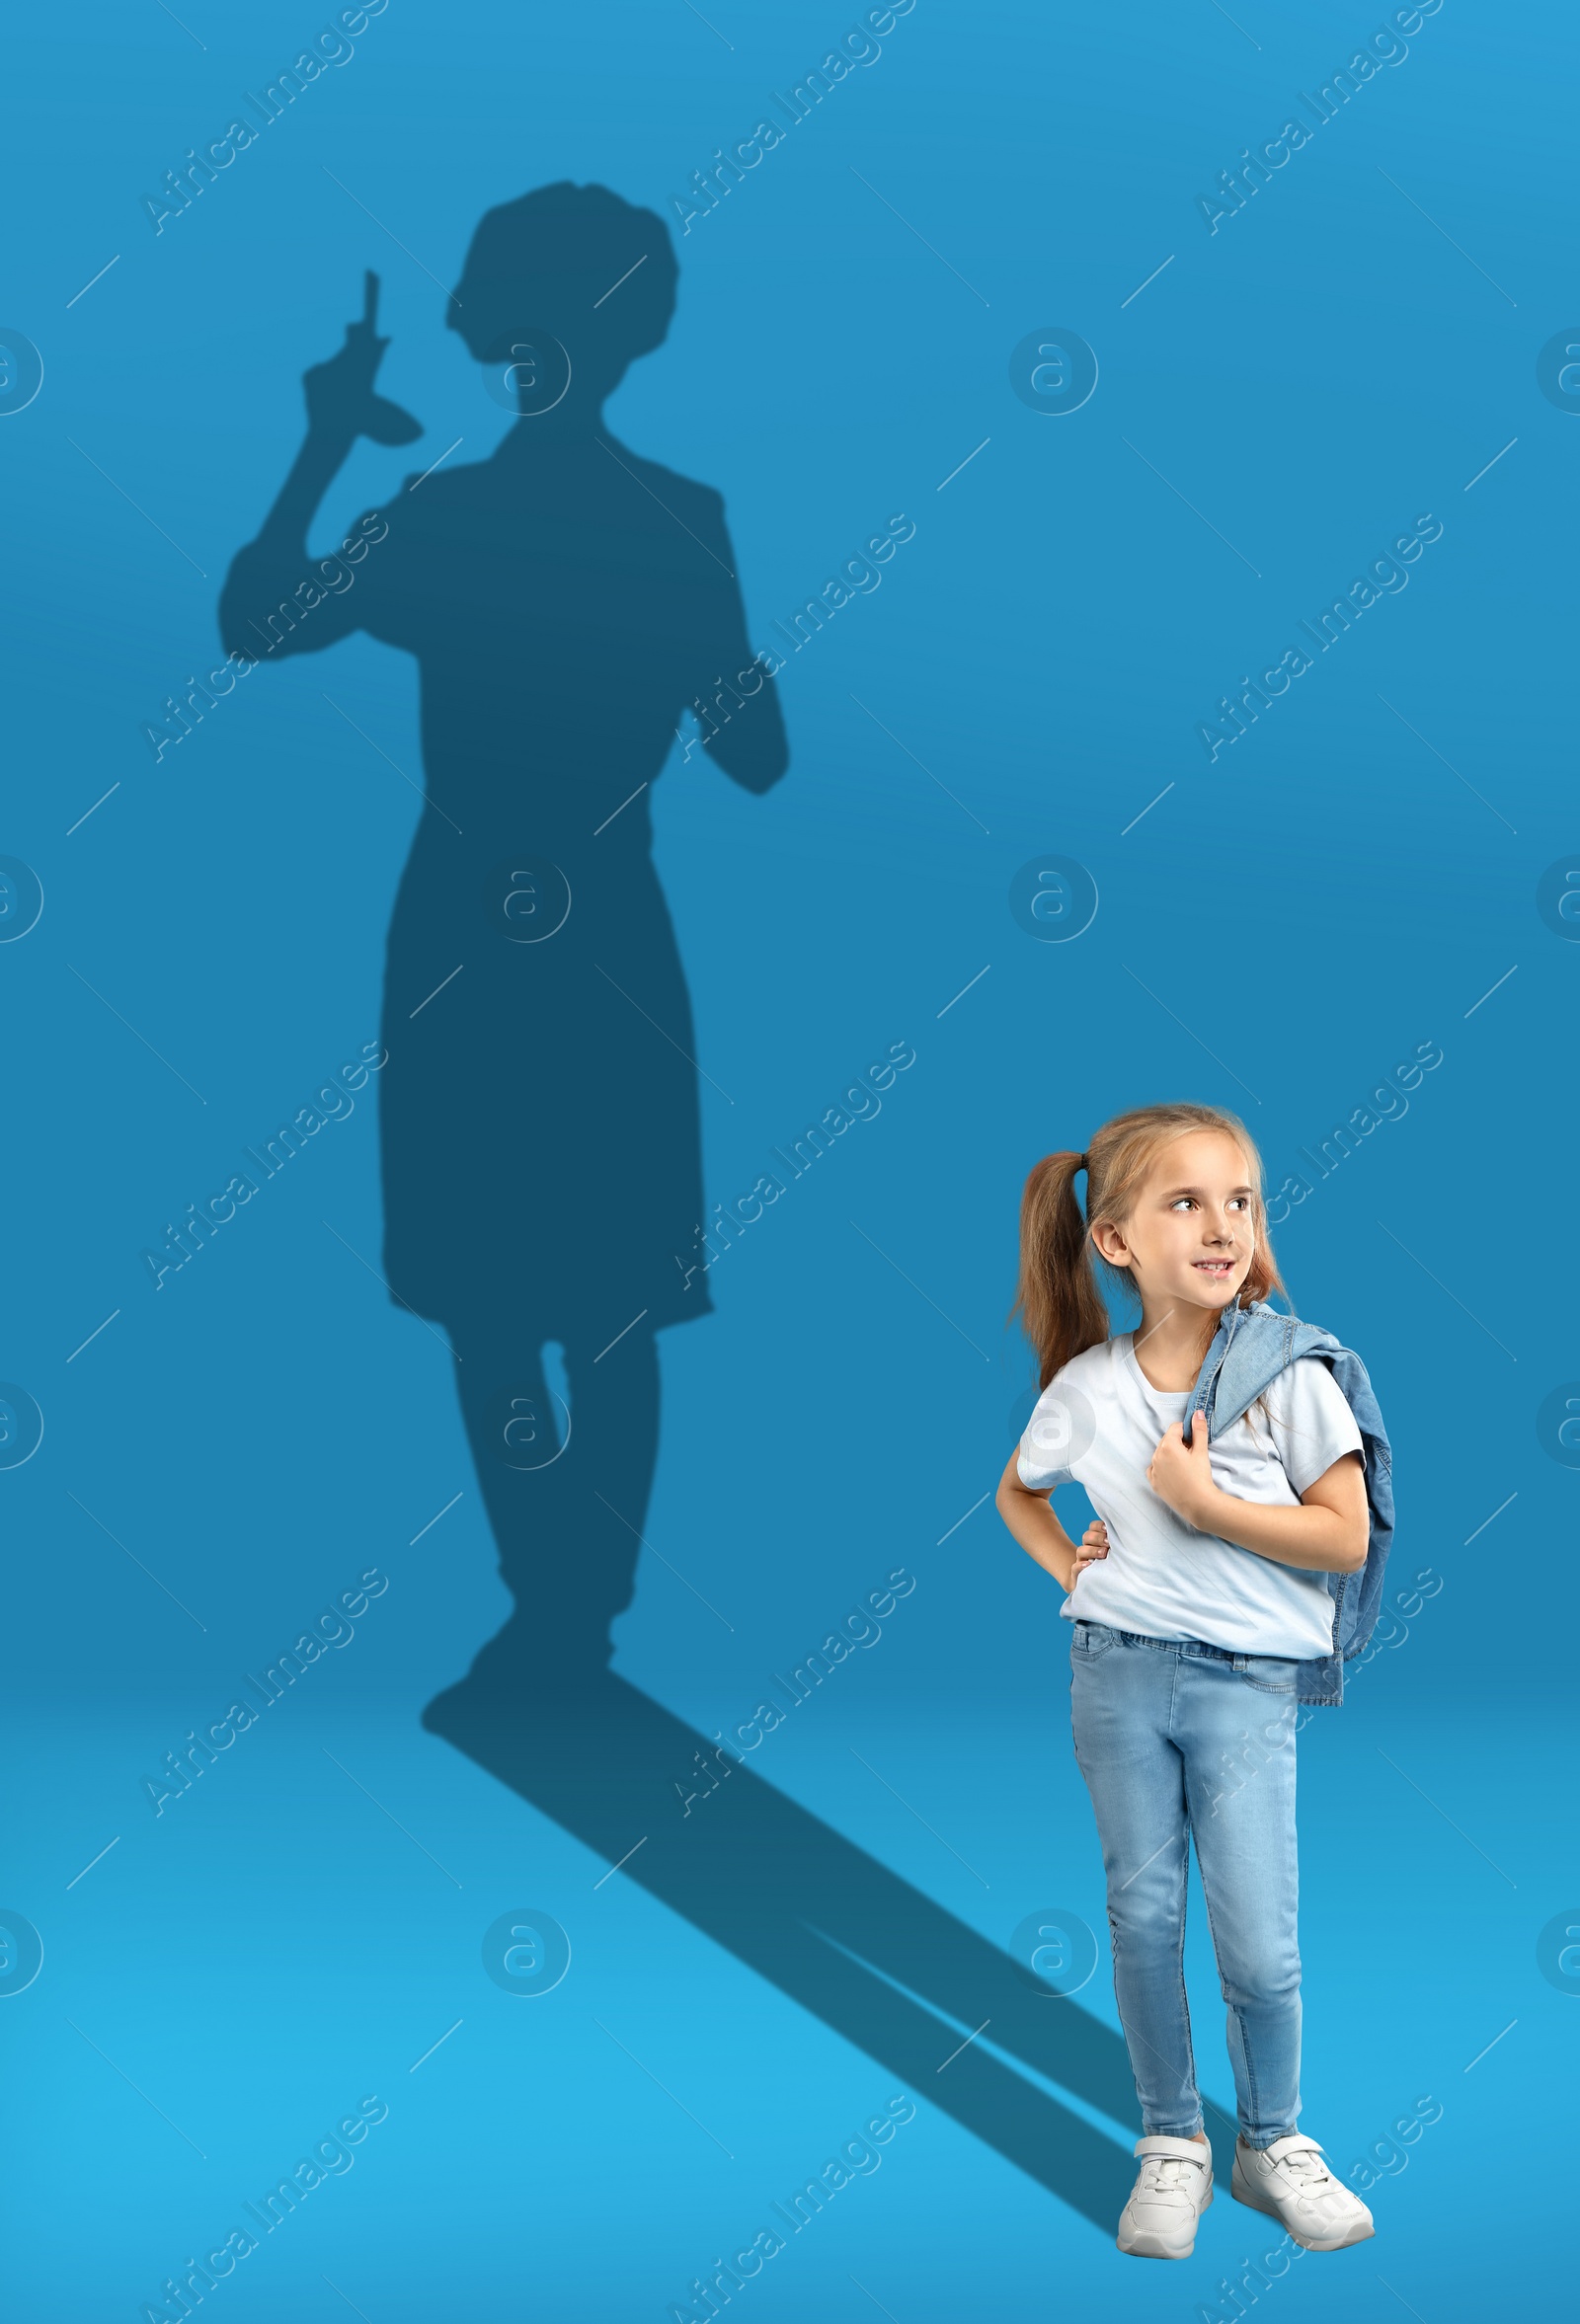 Image of Dream about future occupation. Smiling girl and silhouette of chef on blue background